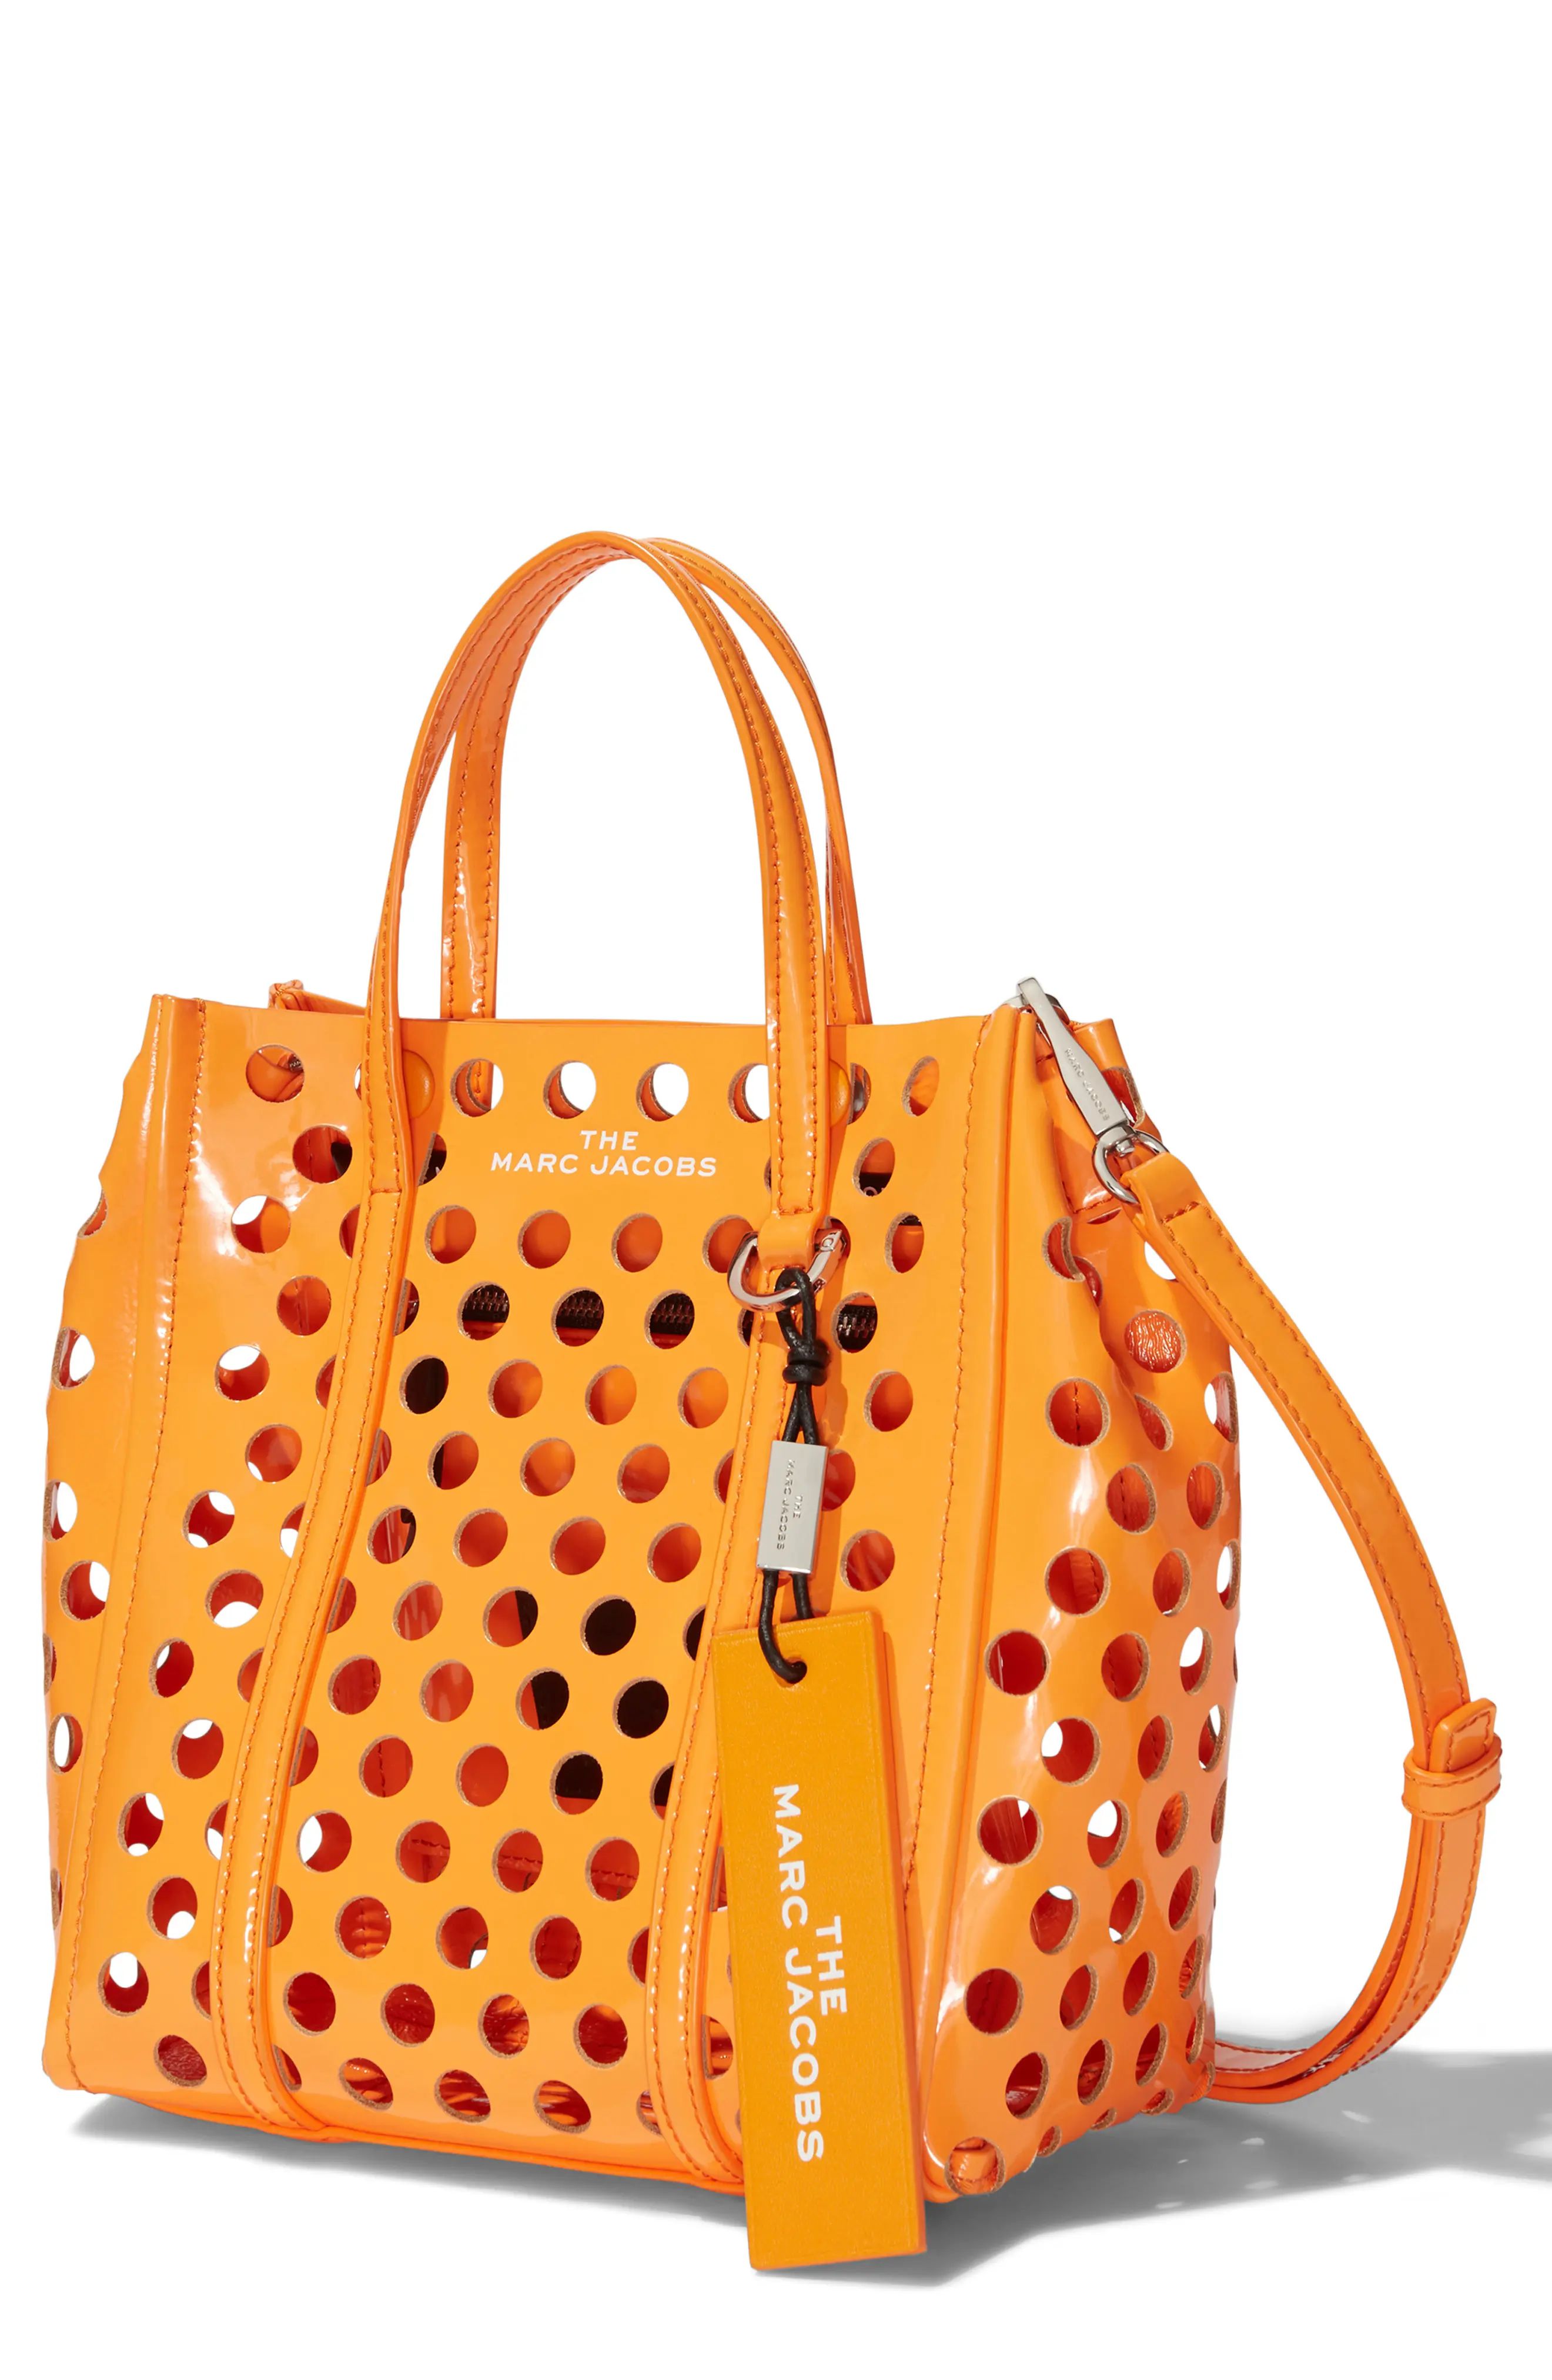 THE MARC JACOBS The Tag 21 Perforated Leather Tote at Nordstrom Rack | Nordstrom Rack